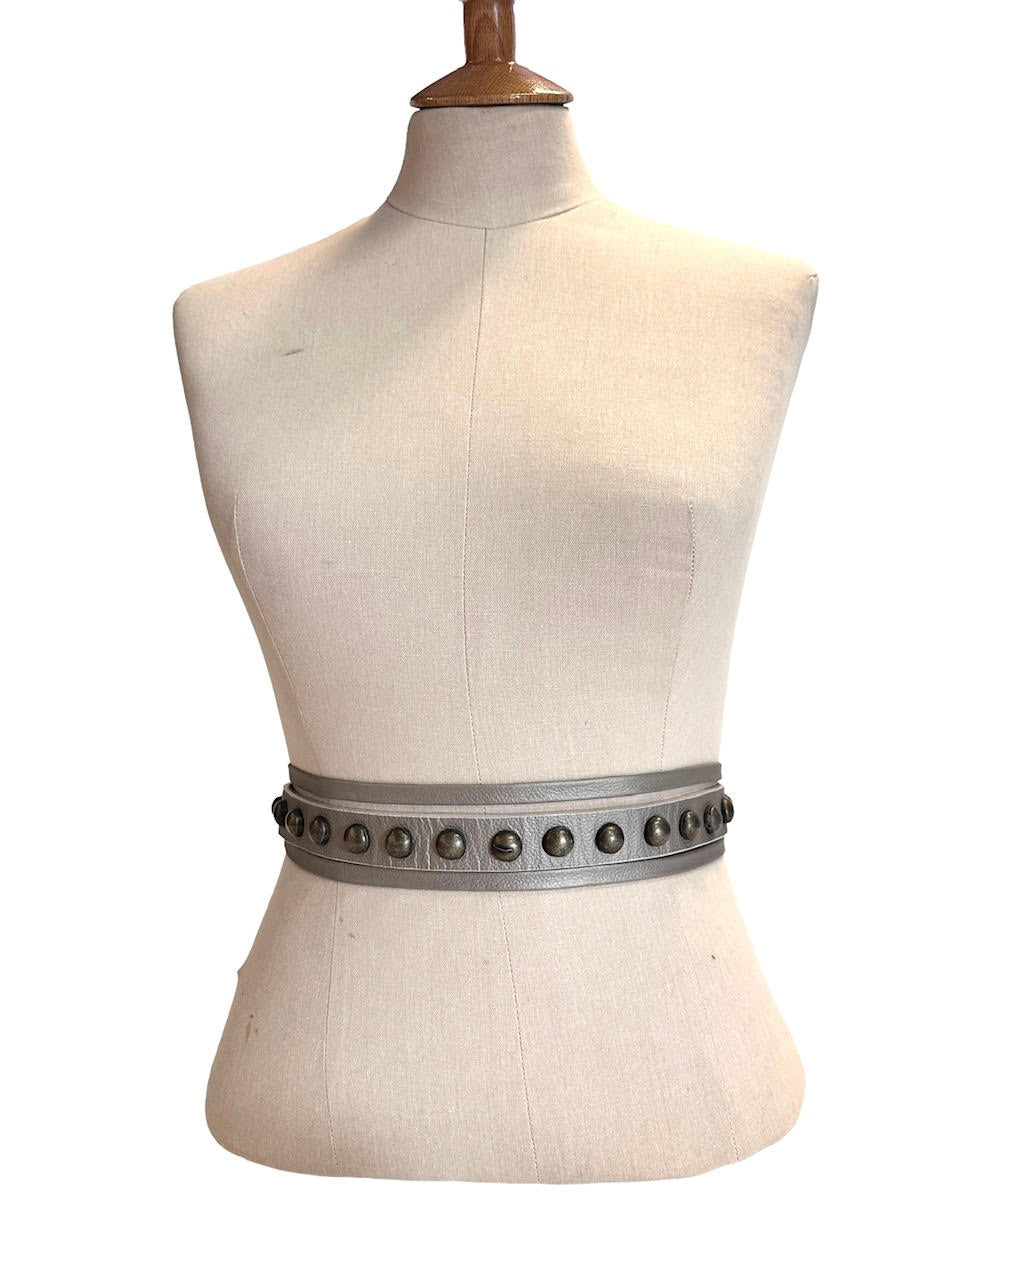 Handmade Leather Stud Belt in gold by Ximena Castillo